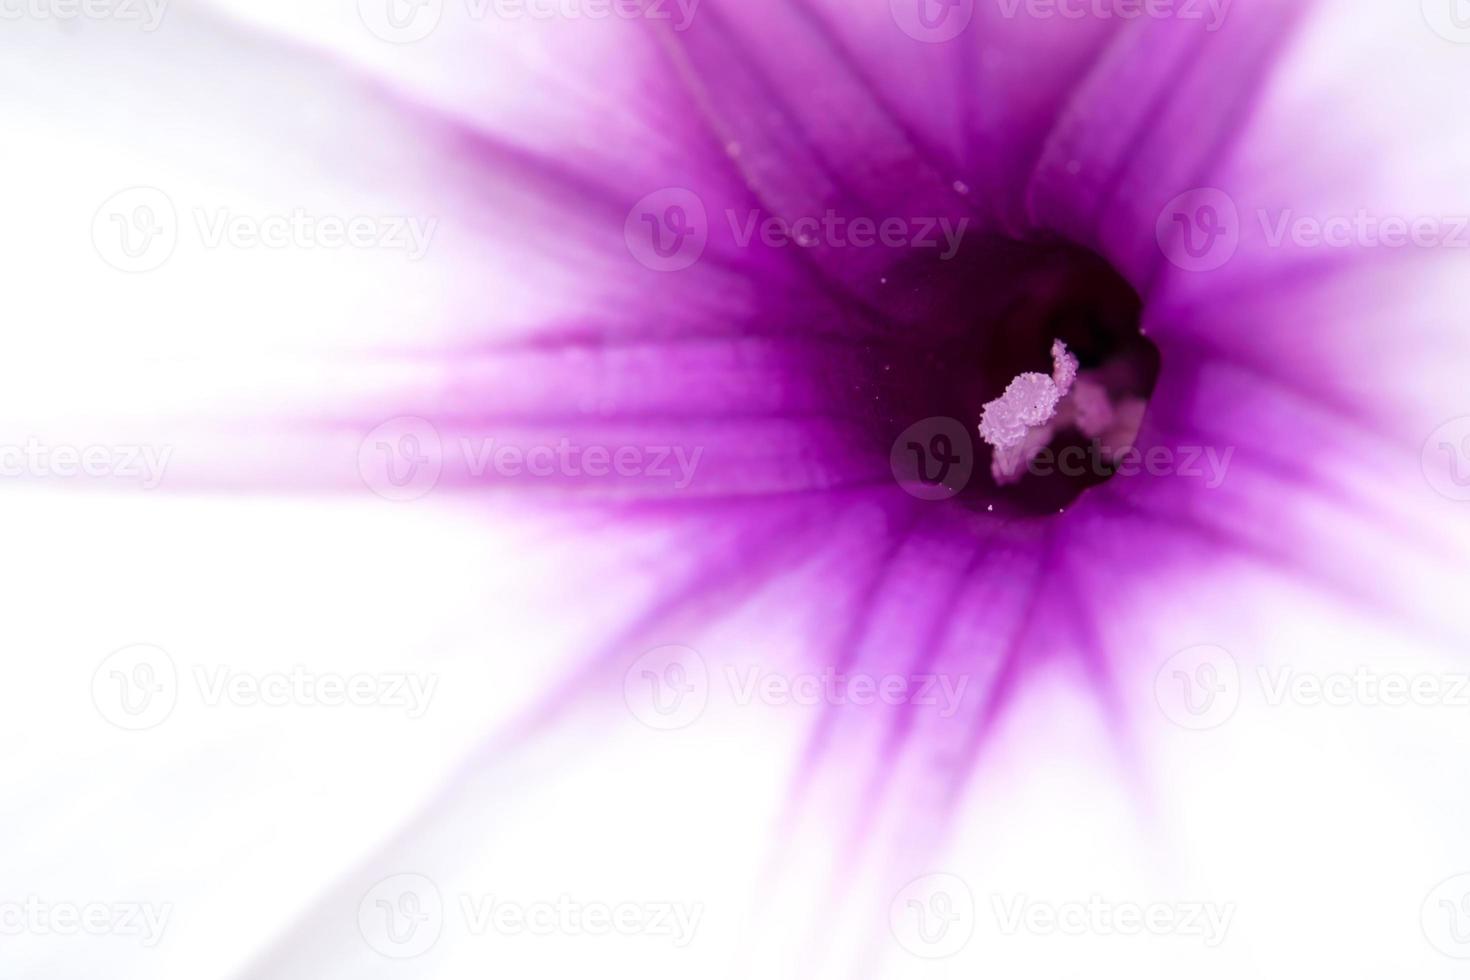 Texture detail of morning glory flower photo